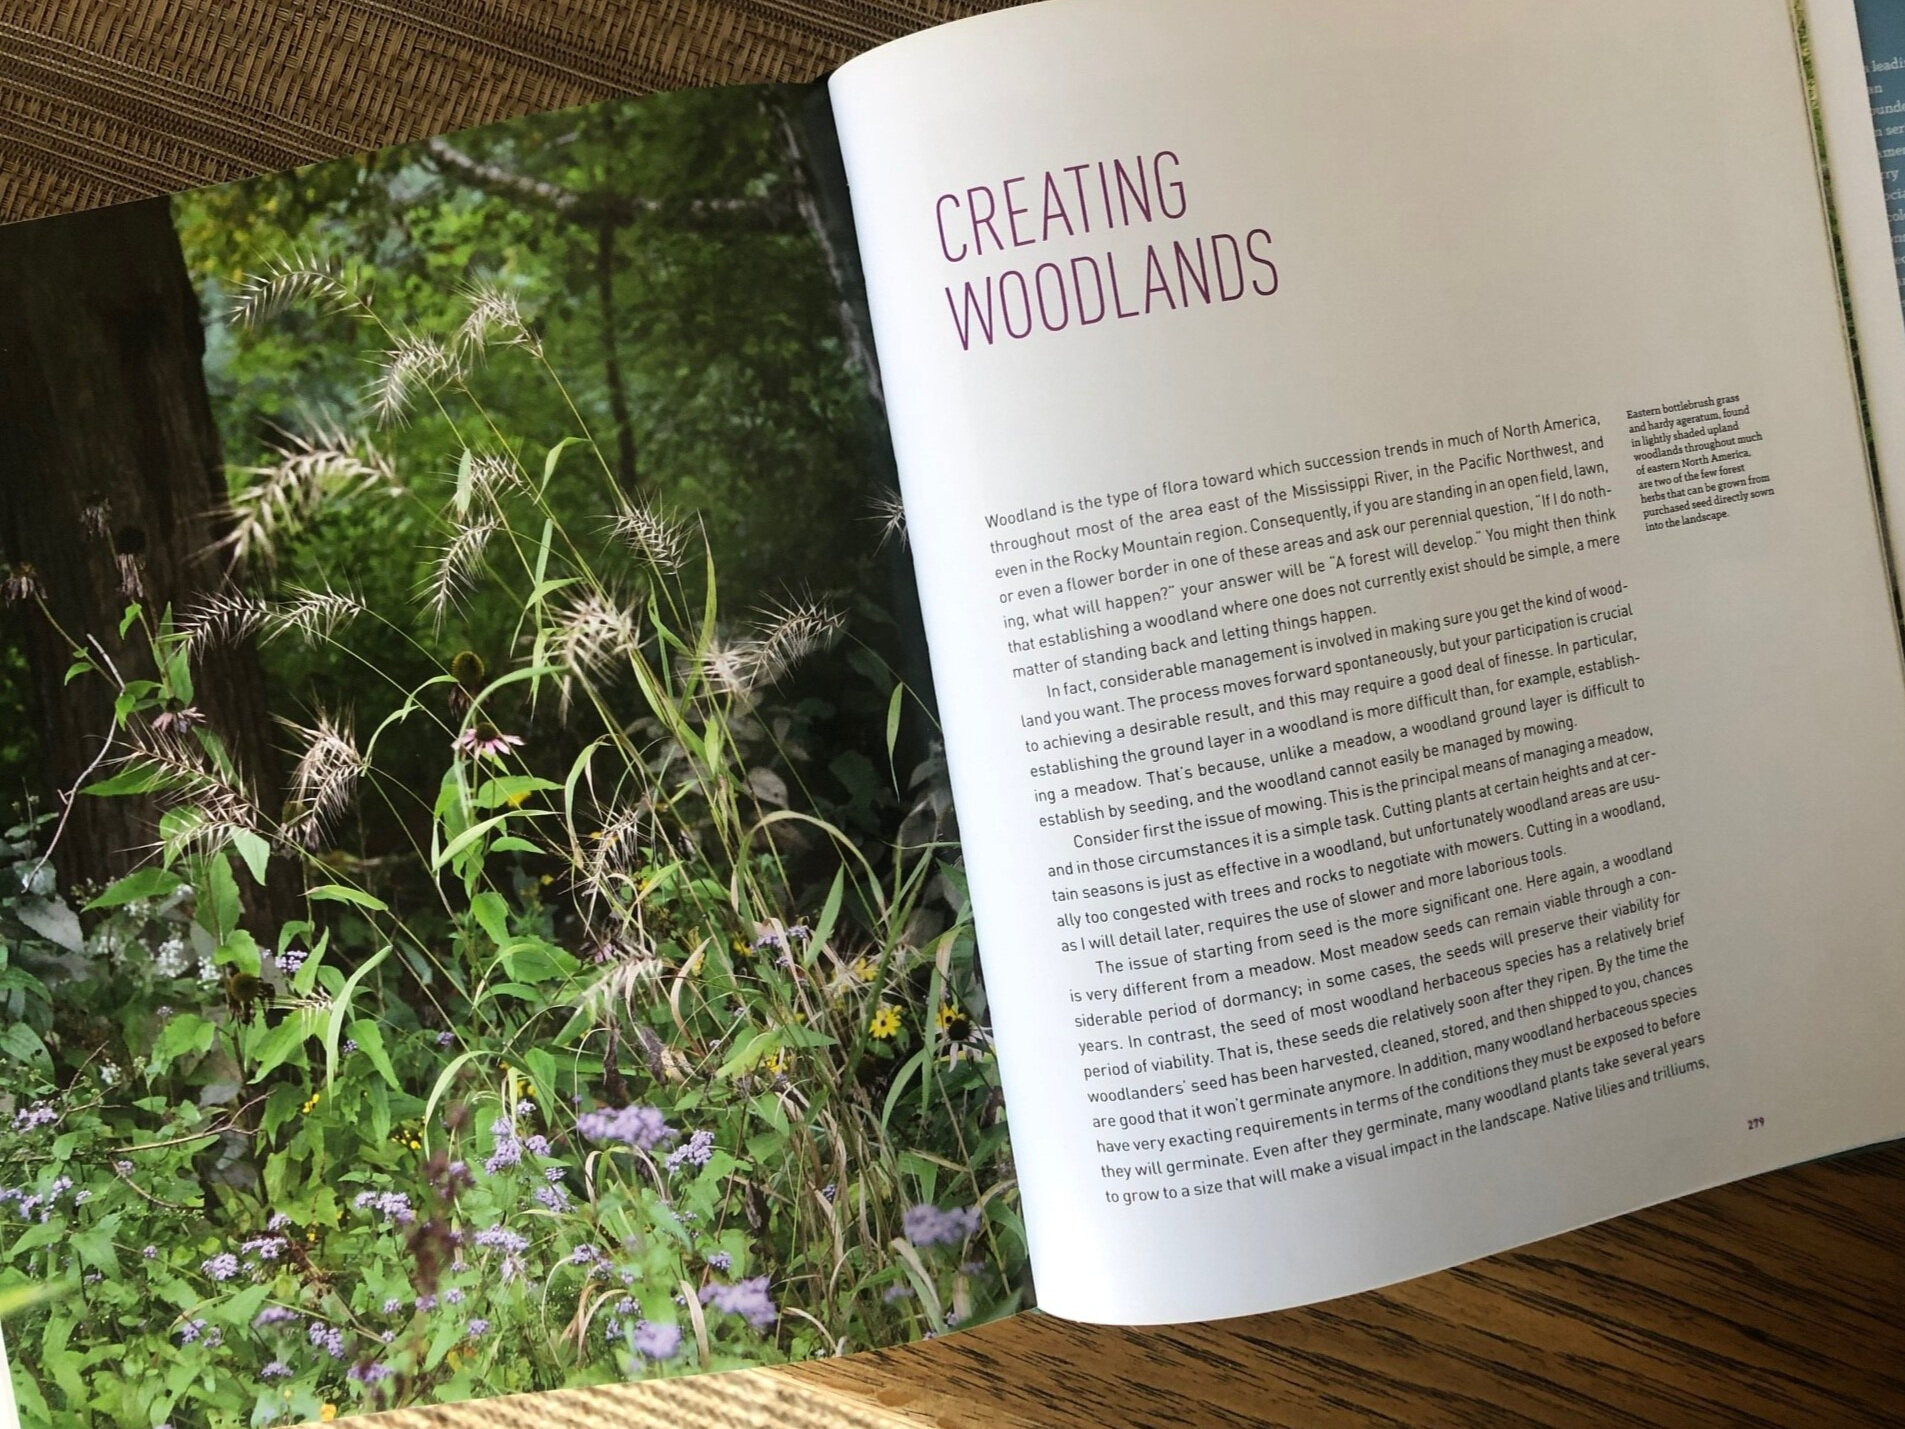 One of the last chapters in the book focuses on the steps needed to create and maintain an ecologically-based woodland garden.